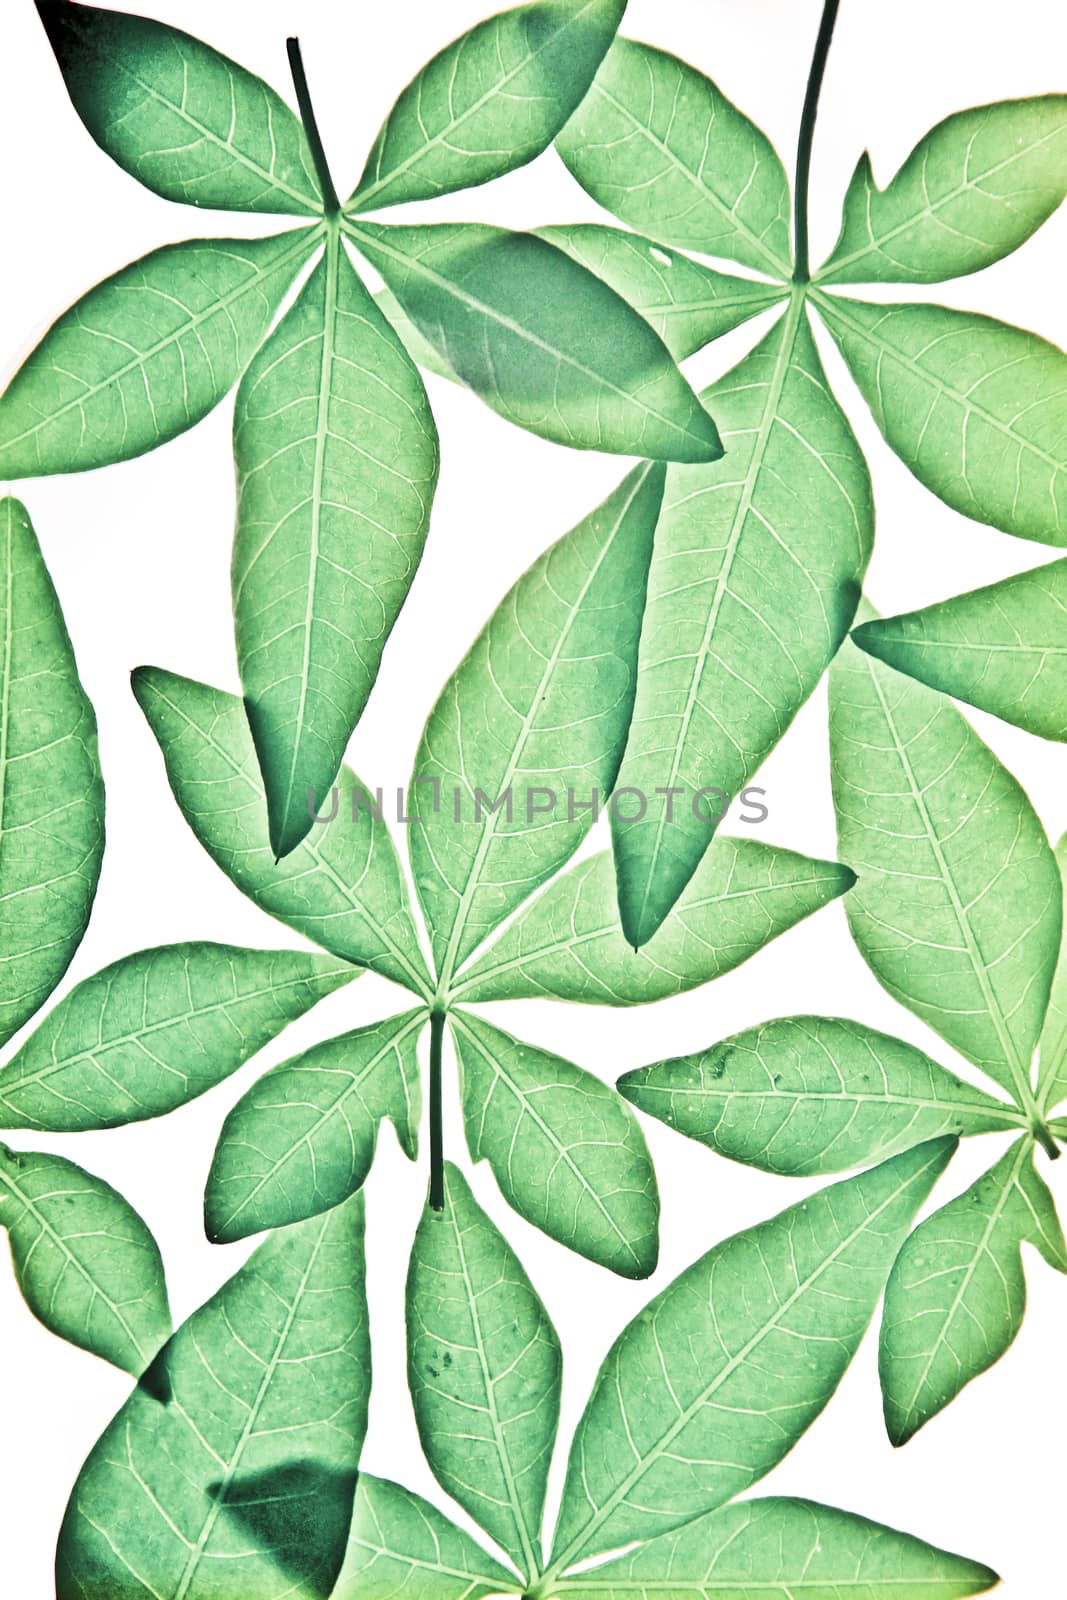 Leaves of Ipomoea cairica (I. palmata) by yands